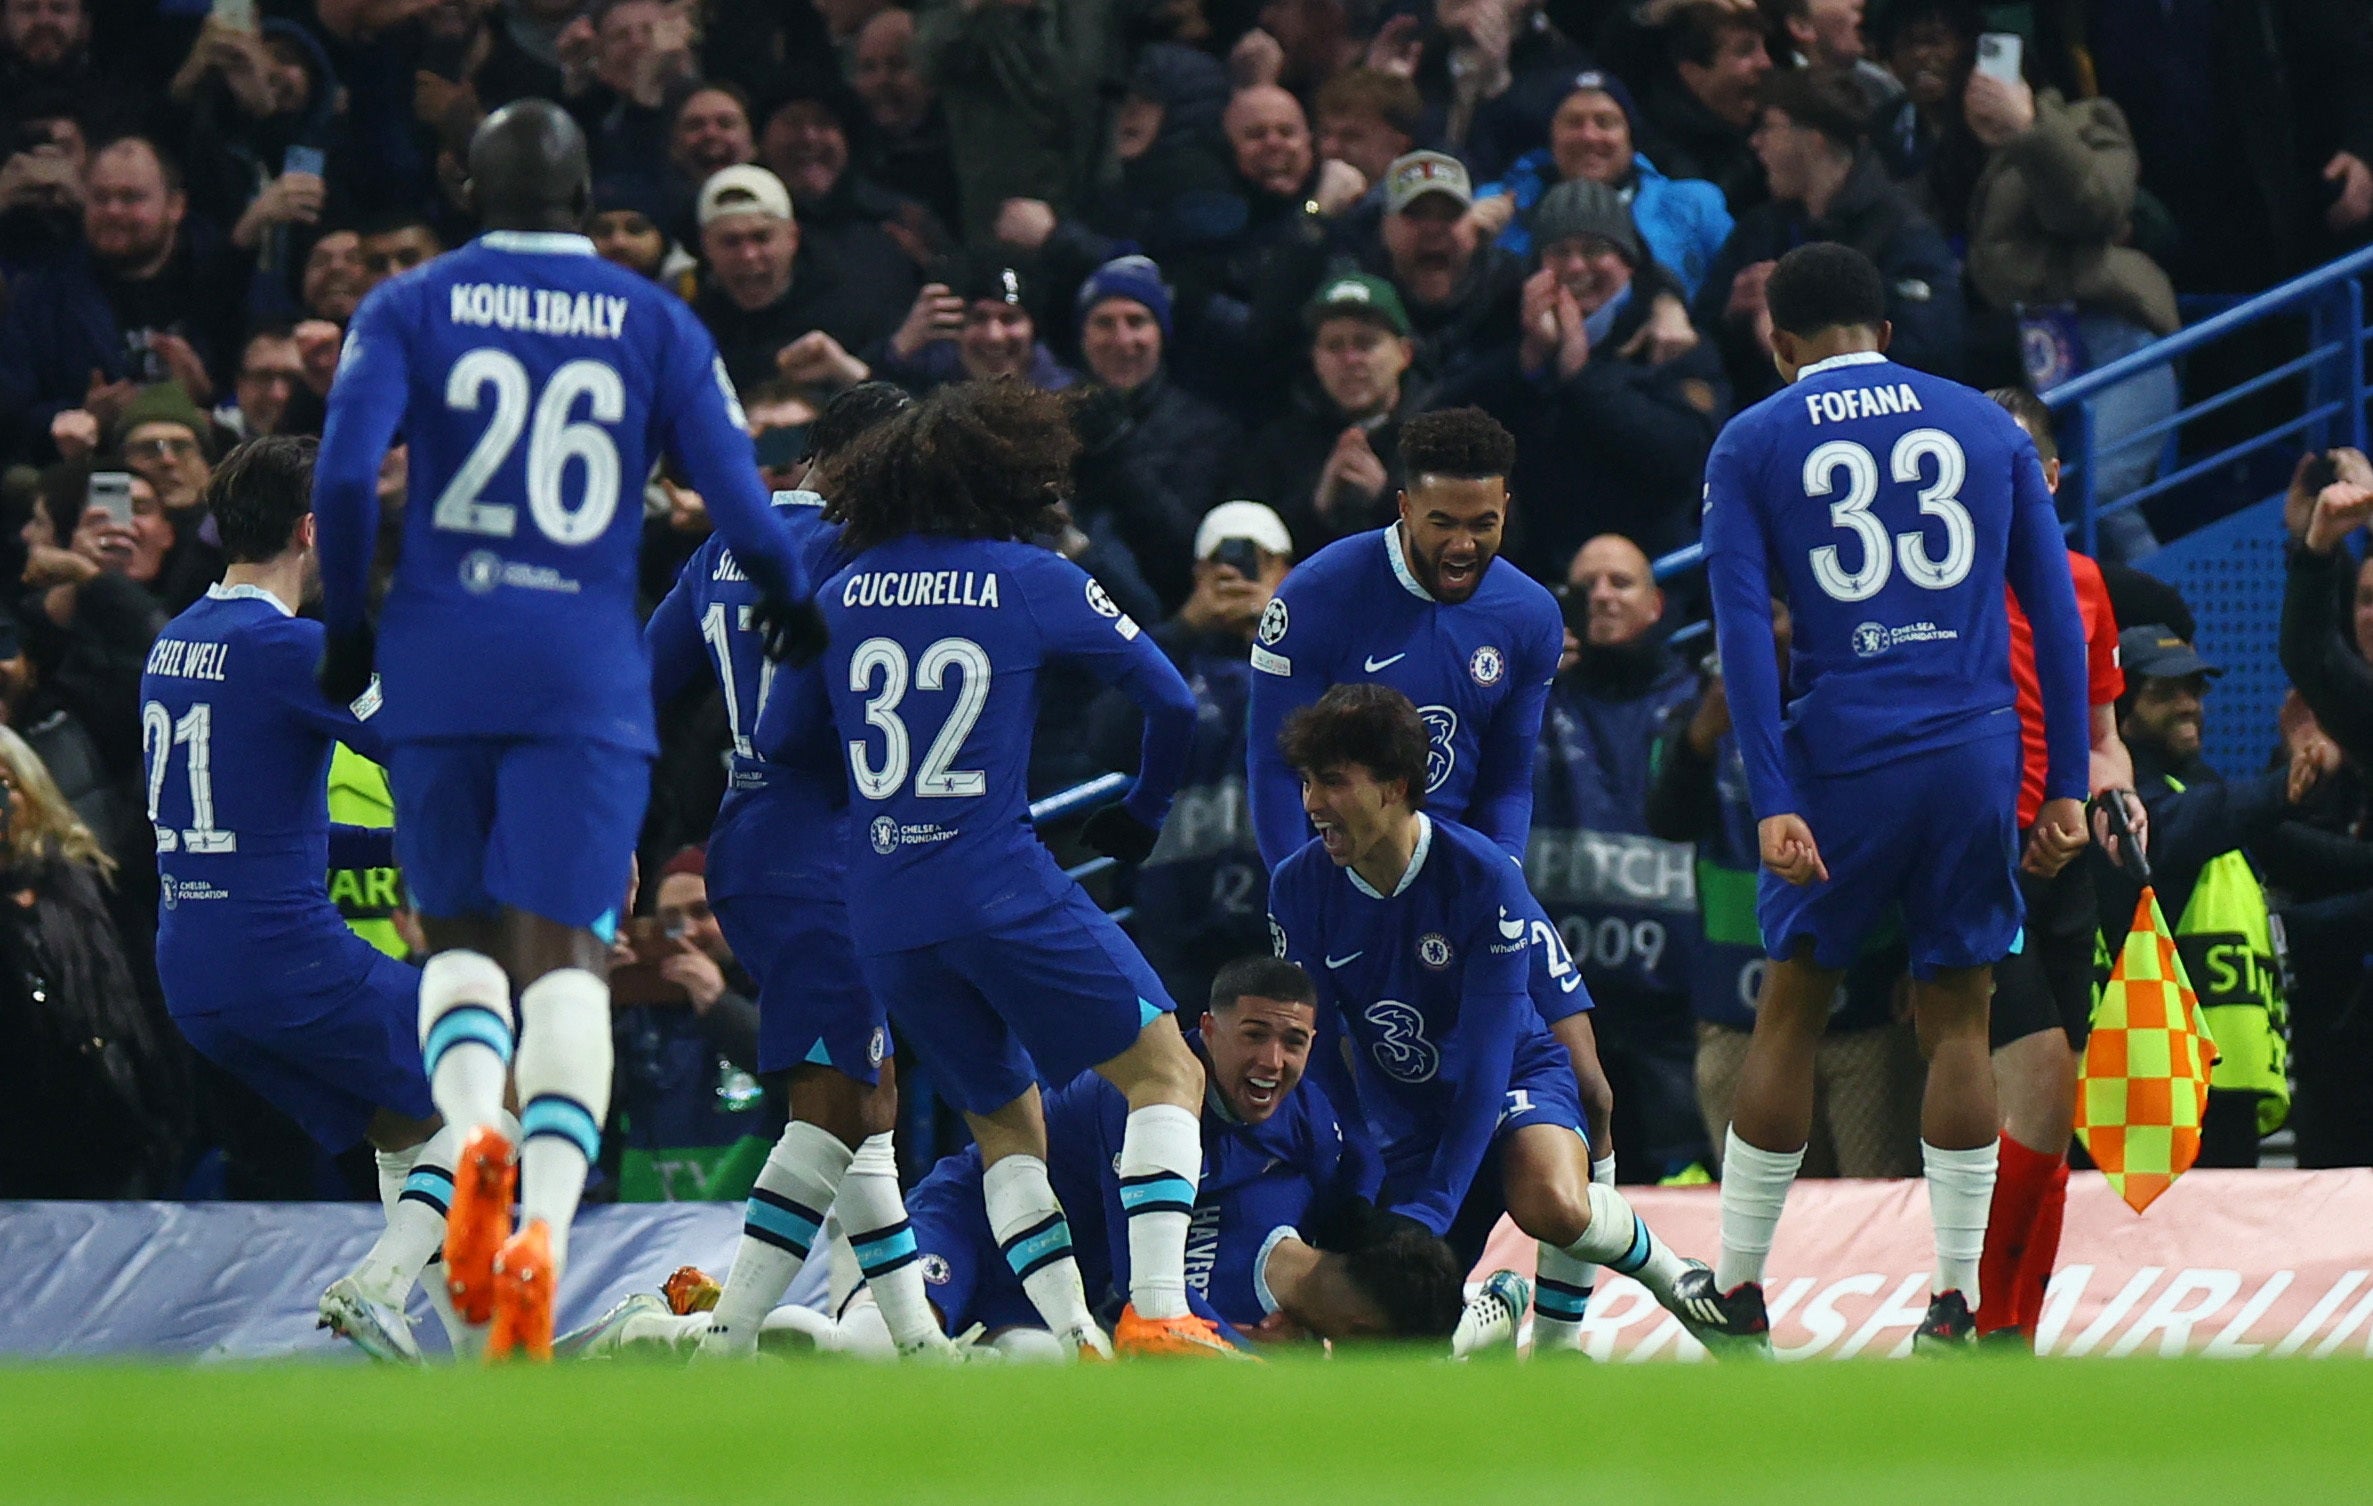 Chelsea came from behind in the tie to seal a place in the Champions League quarter finals